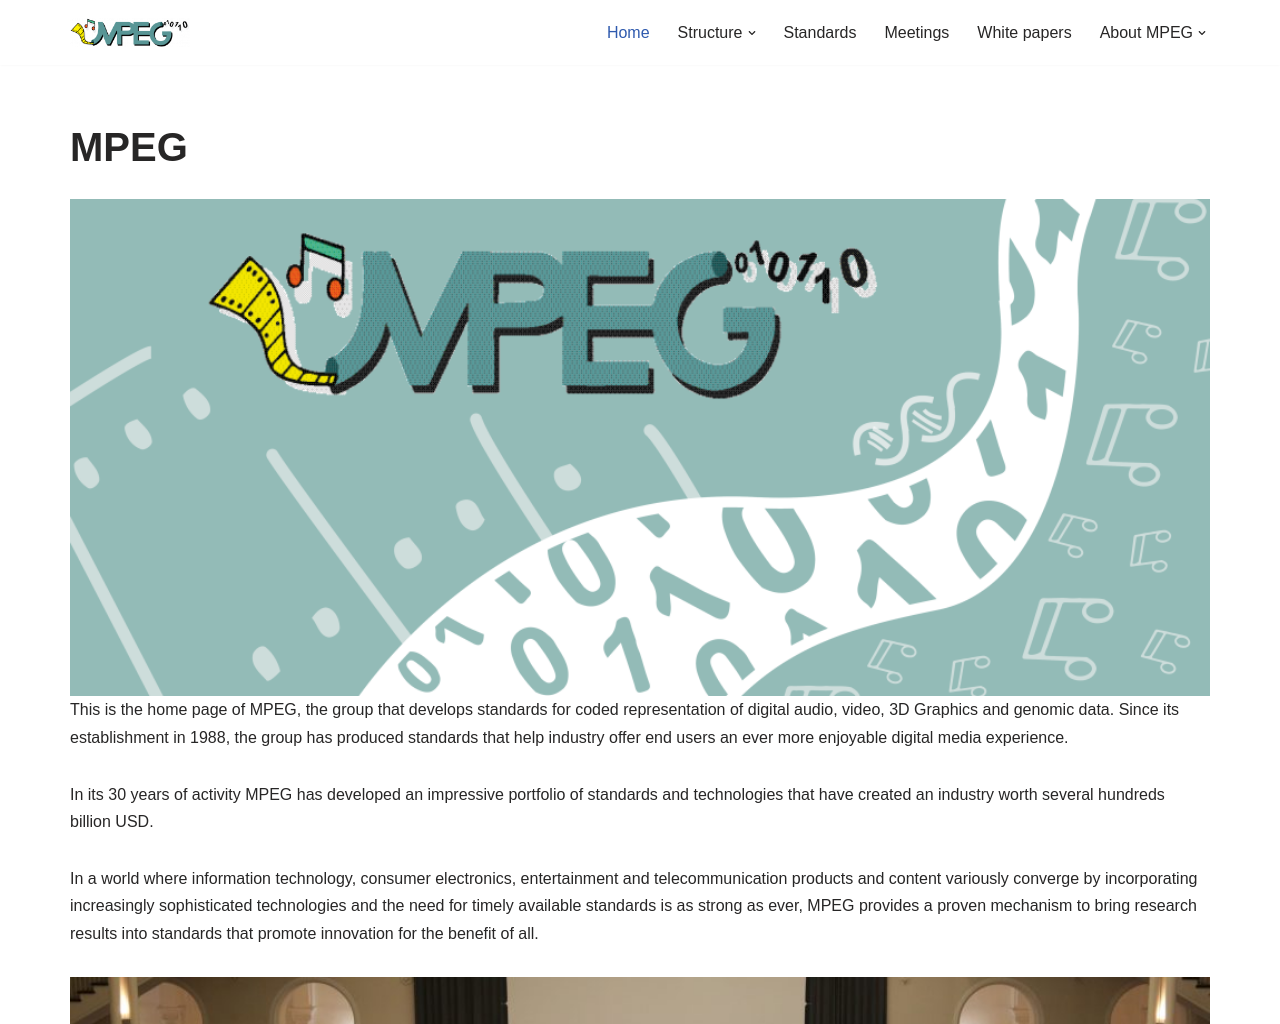 mpeg.org